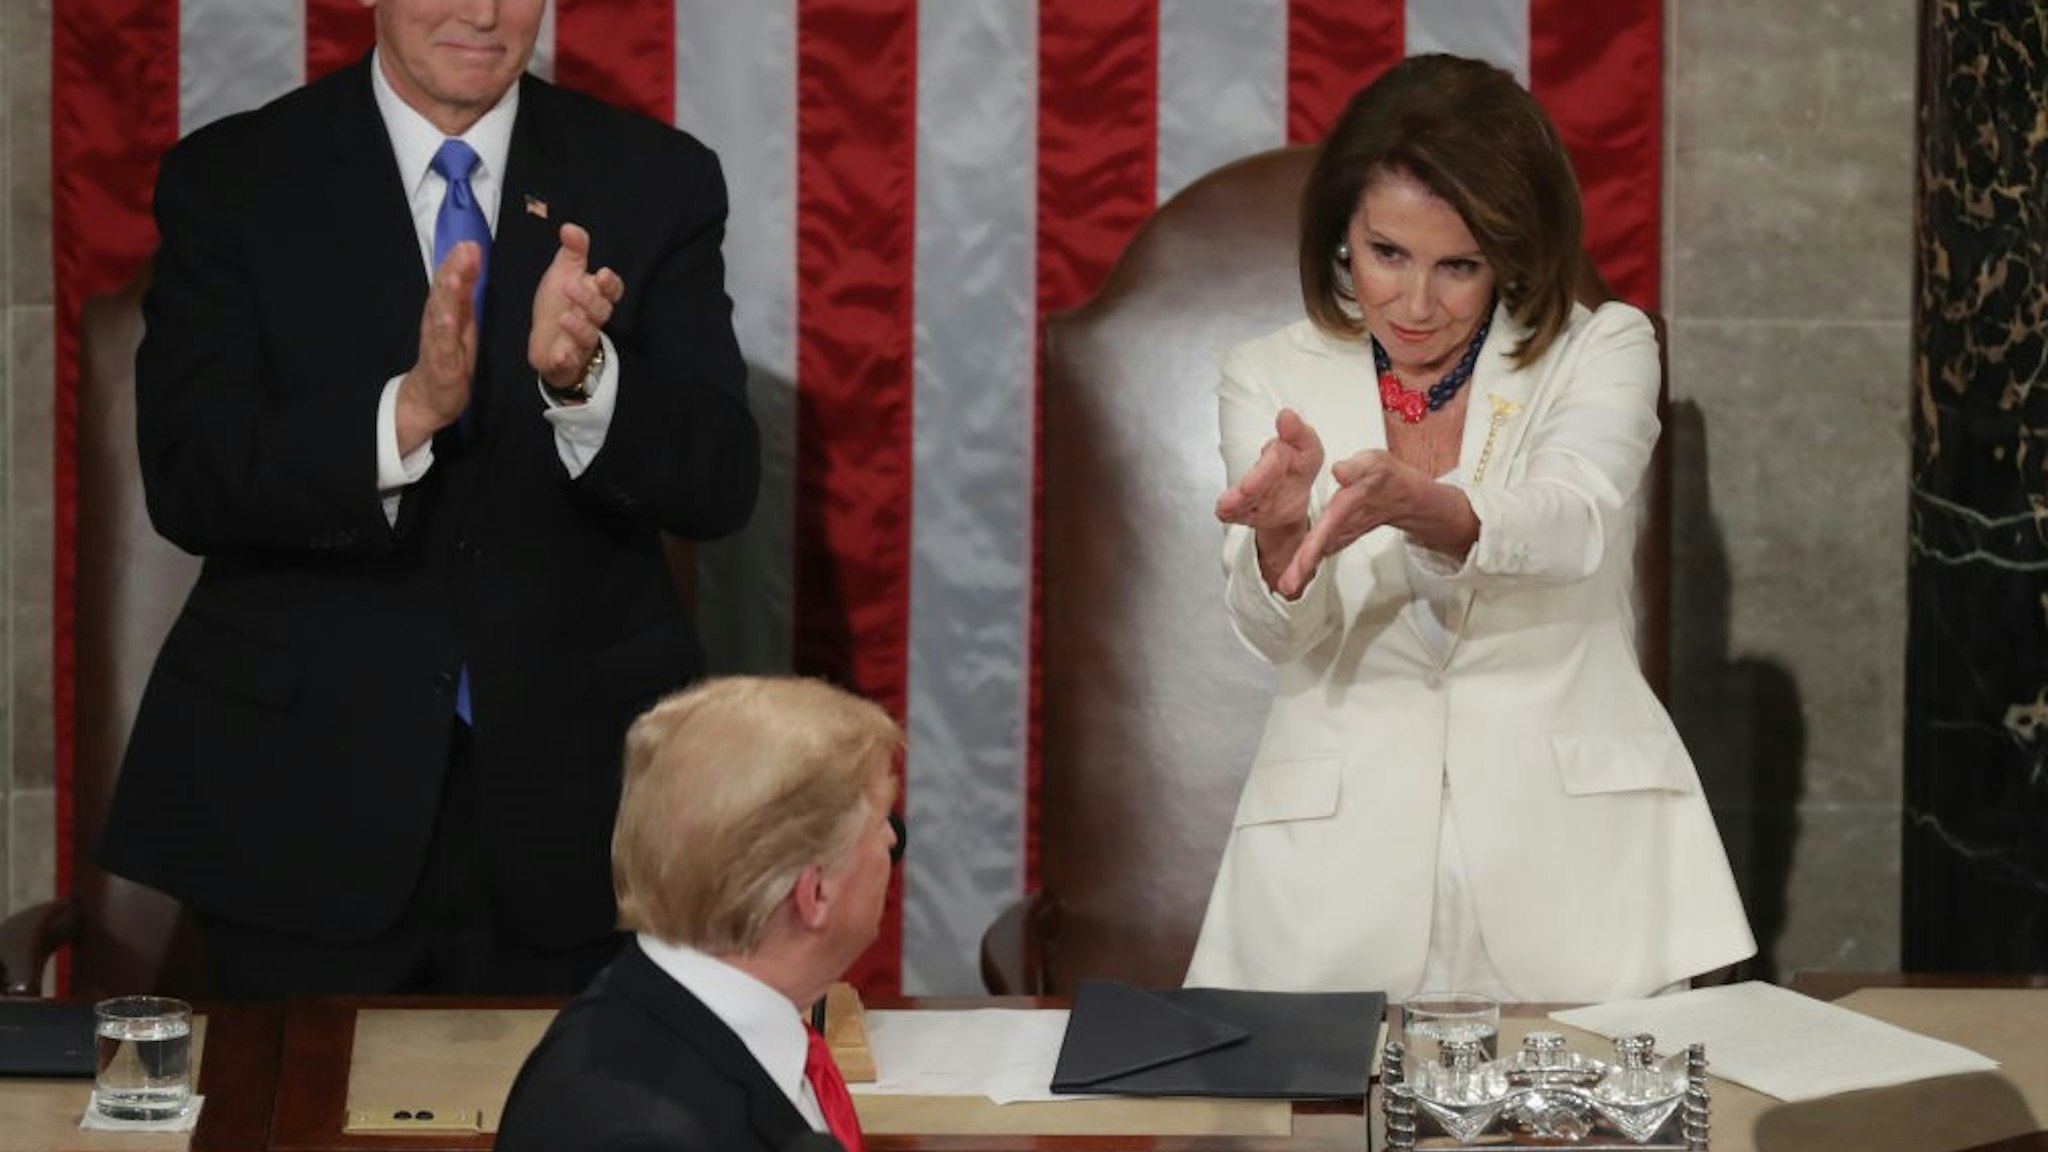 WASHINGTON, DC - FEBRUARY 05: Vice President Mike Pence and Speaker Nancy Pelosi greet President Donald Trump just ahead of the State of the Union address in the chamber of the U.S. House of Representatives at the U.S. Capitol Building on February 5, 2019 in Washington, DC. President Trump's second State of the Union address was postponed one week due to the partial government shutdown. (Photo by